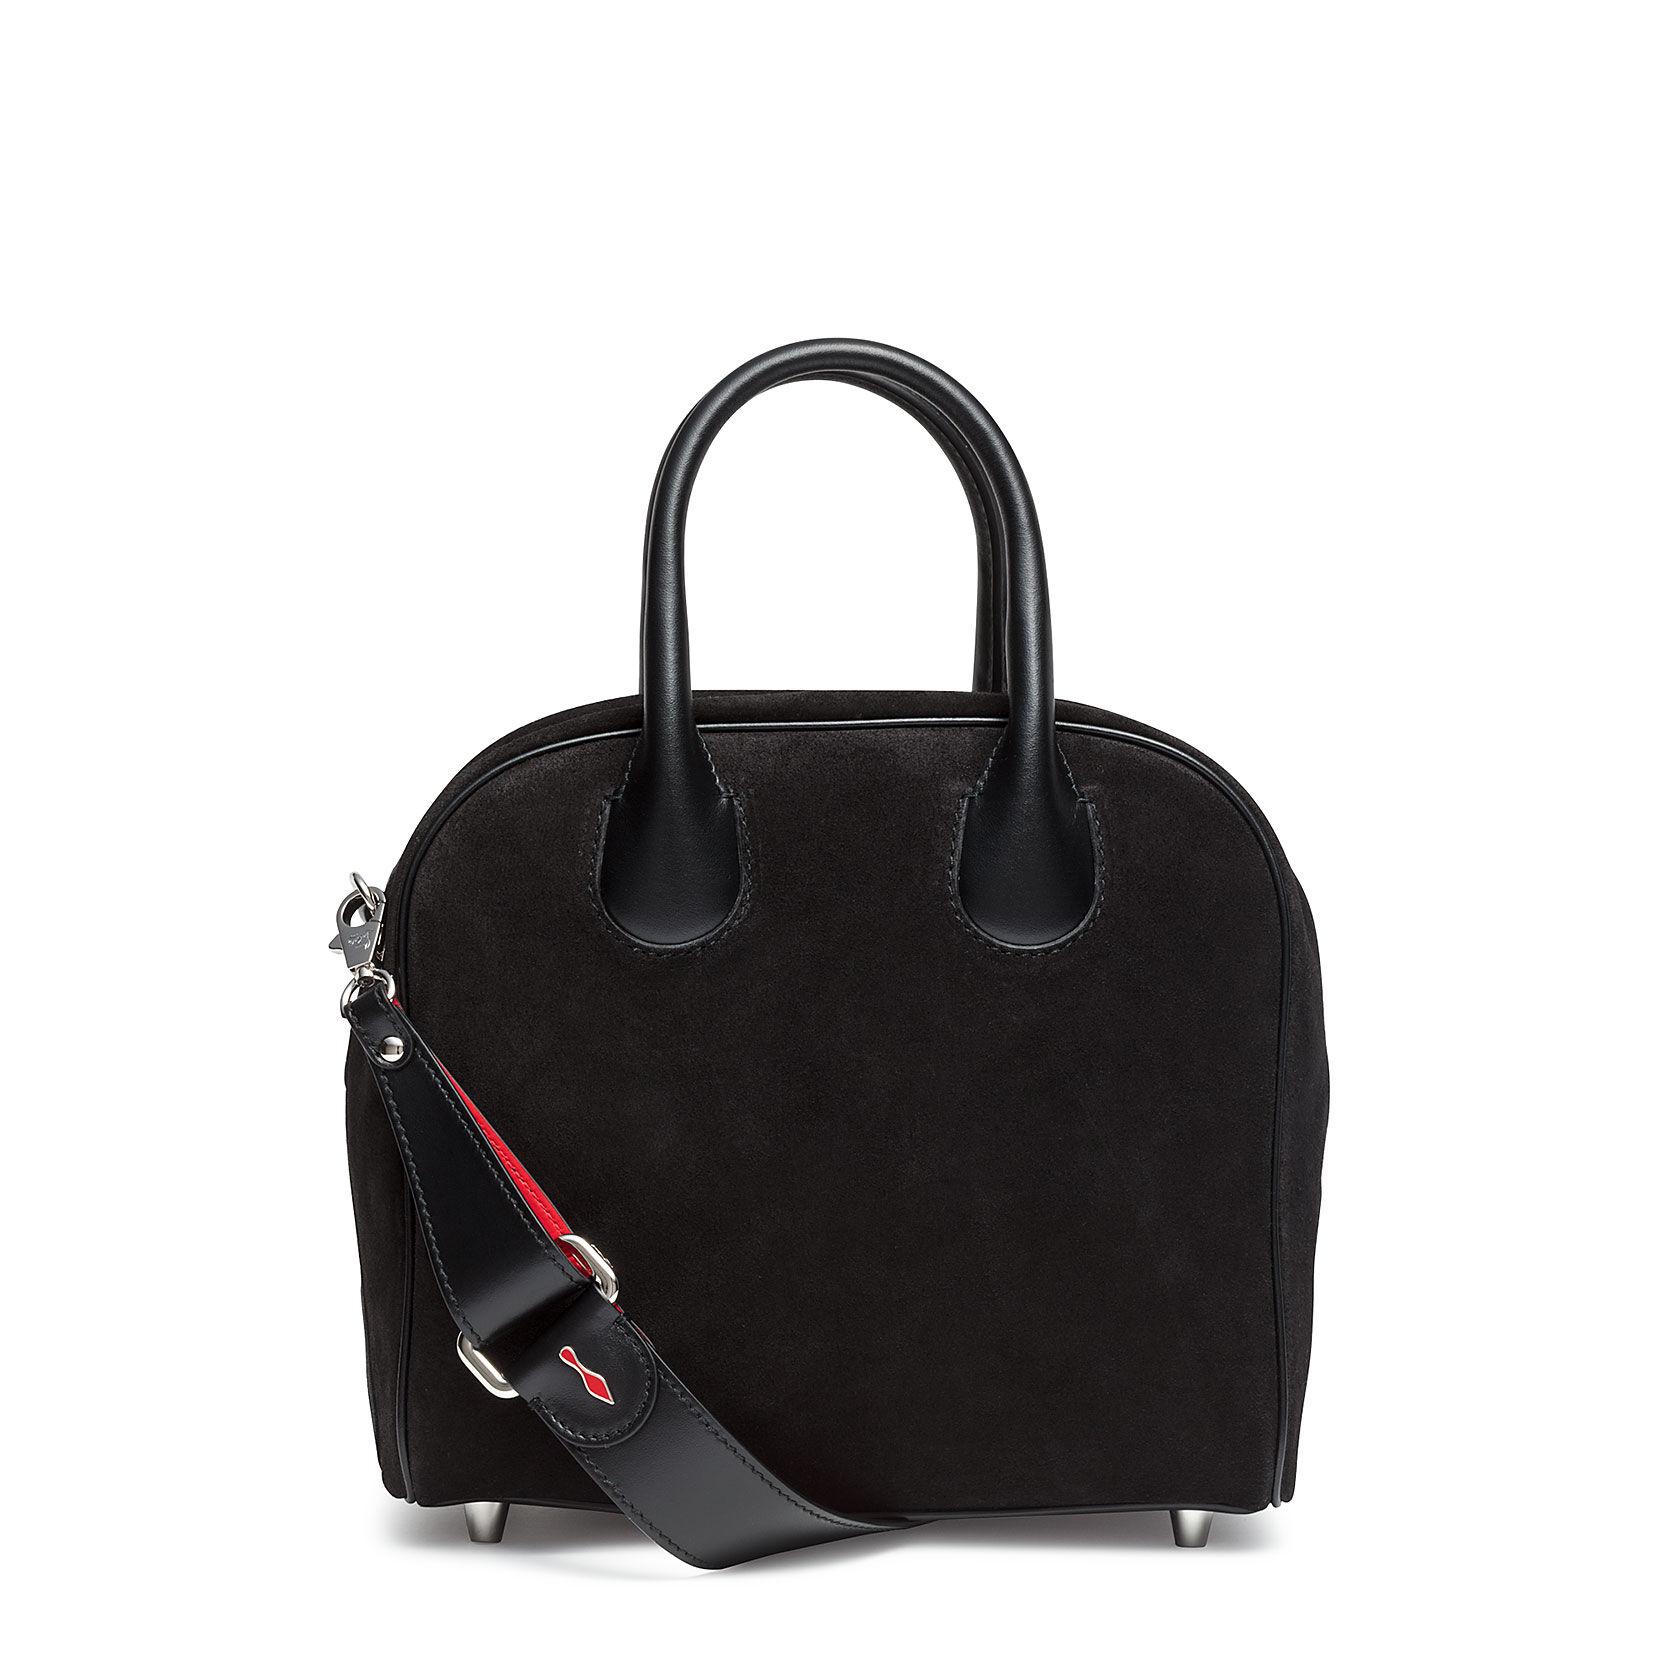 Christian Louboutin Marie Jane Small Black Suede Shoulder Bag - Lyst